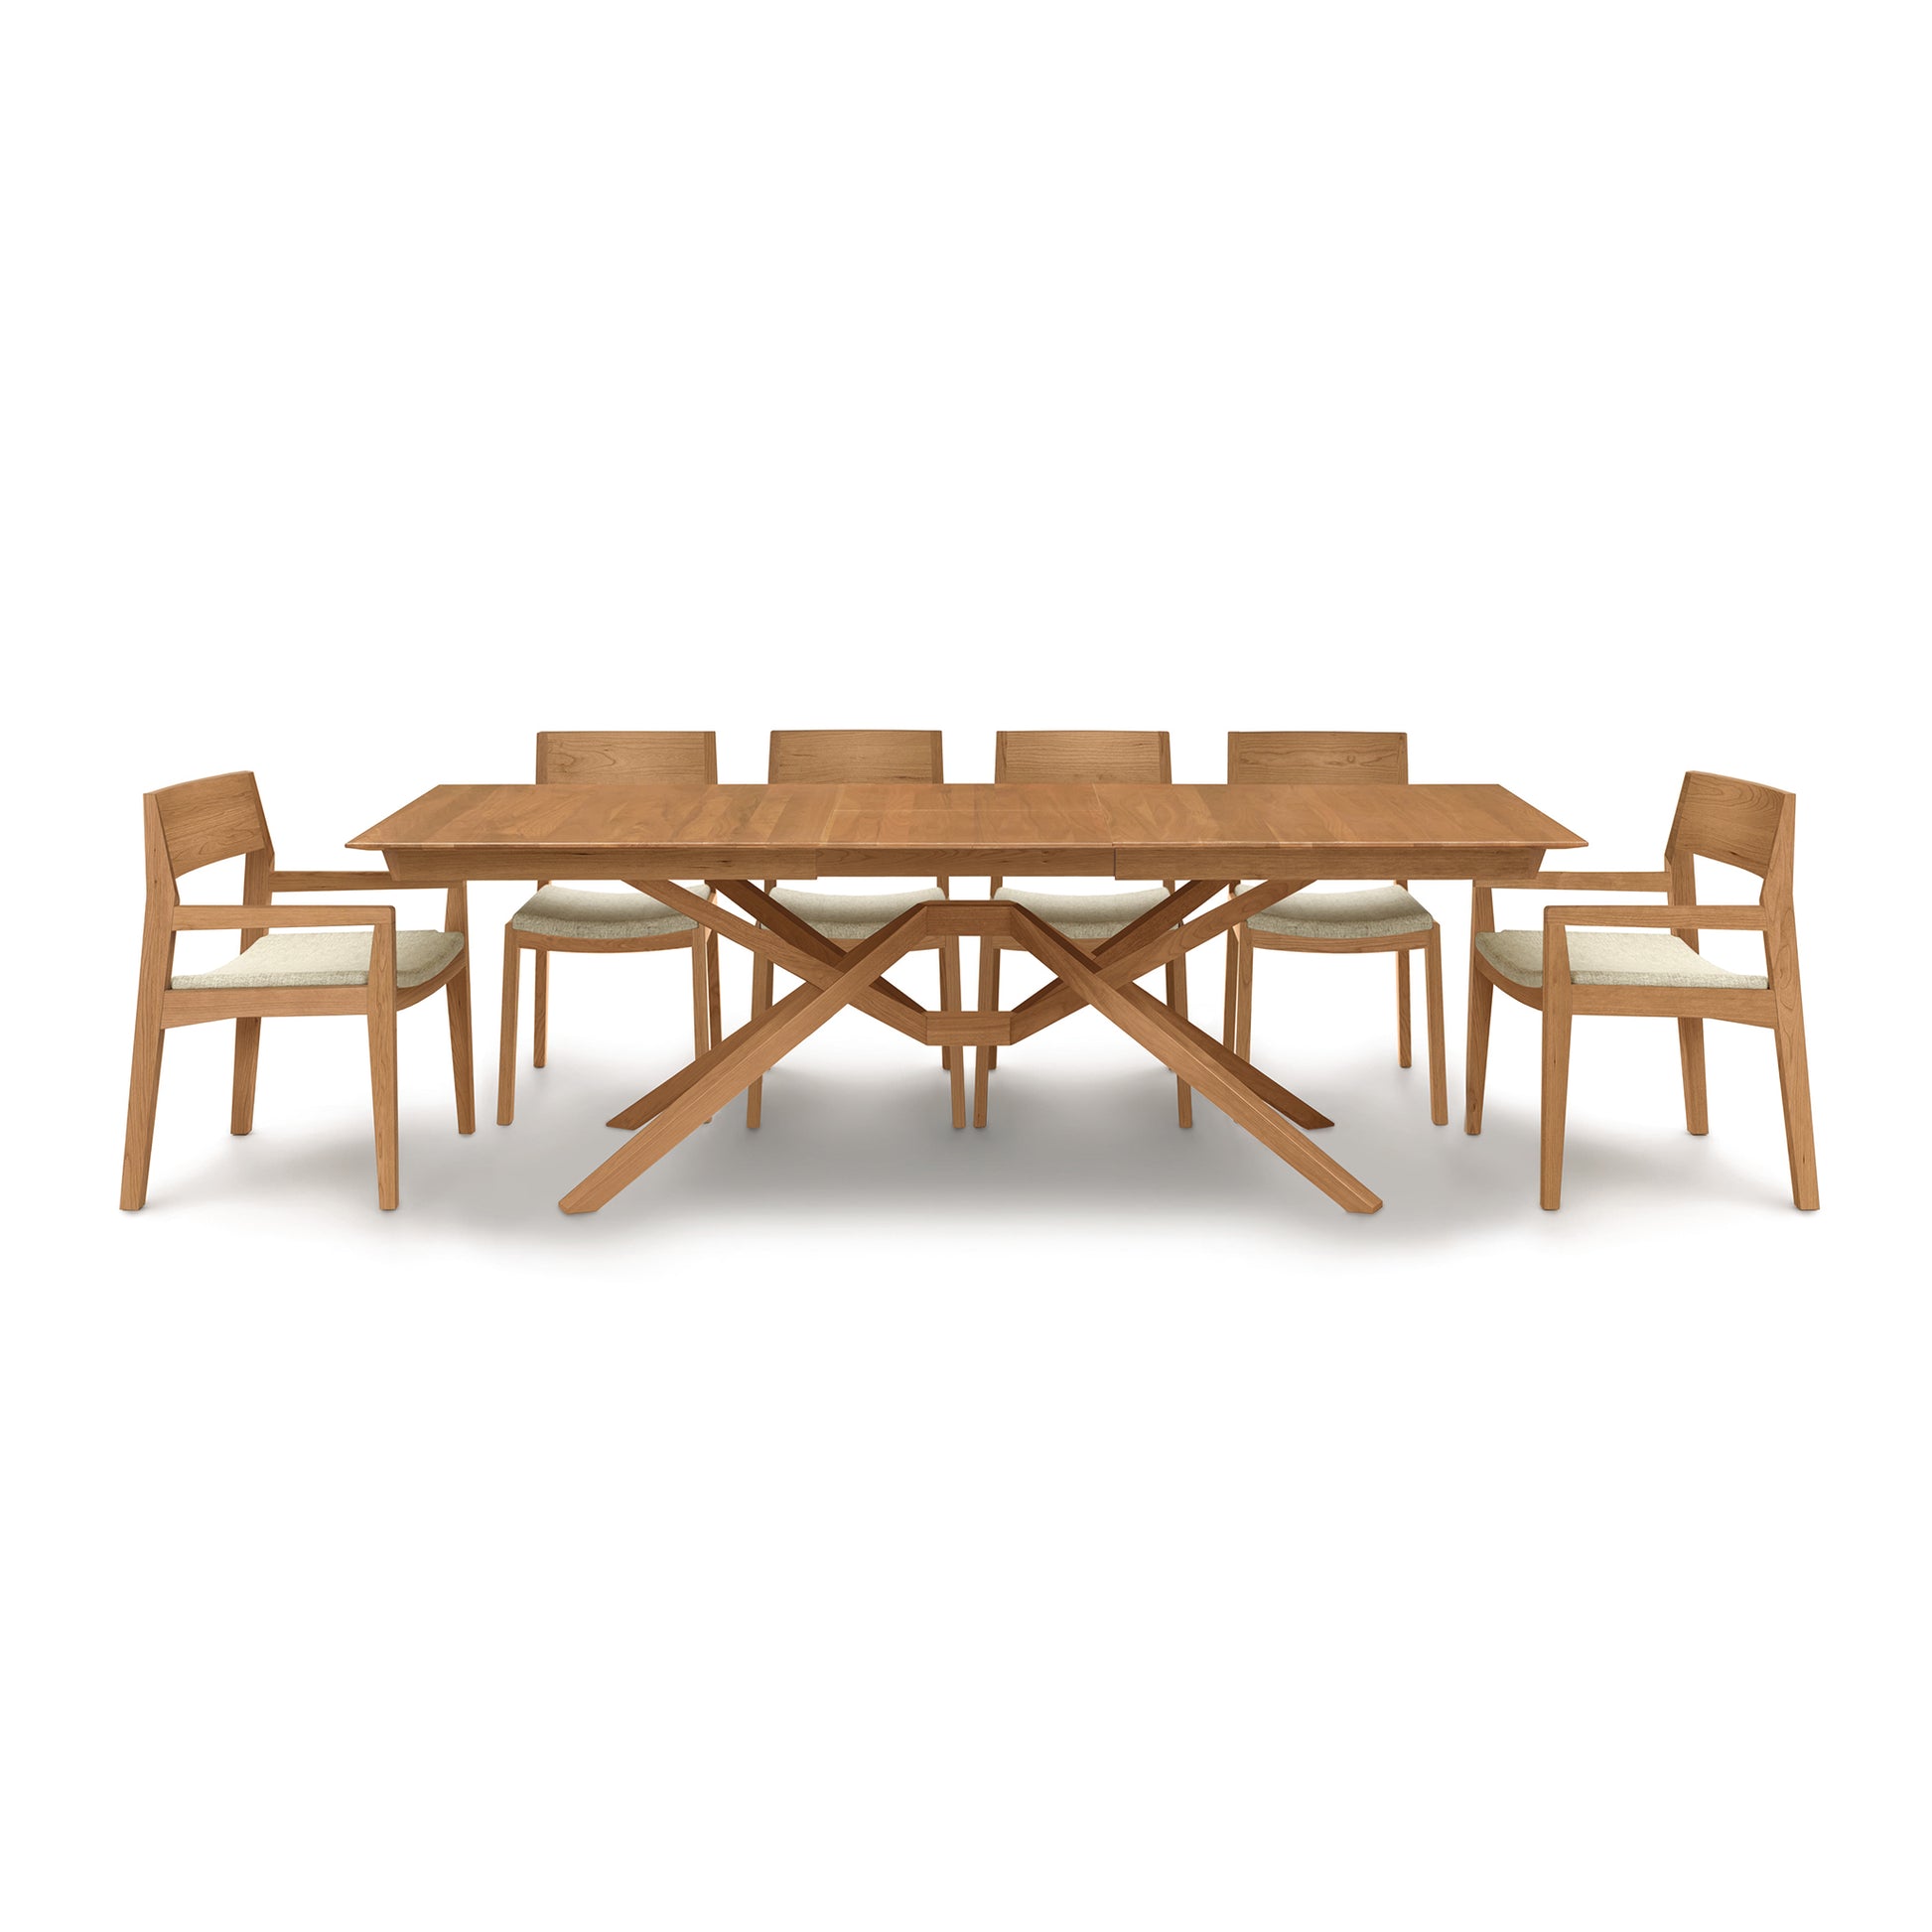 A modern Exeter Extension Dining Table by Copeland Furniture with six chairs and an extension feature.